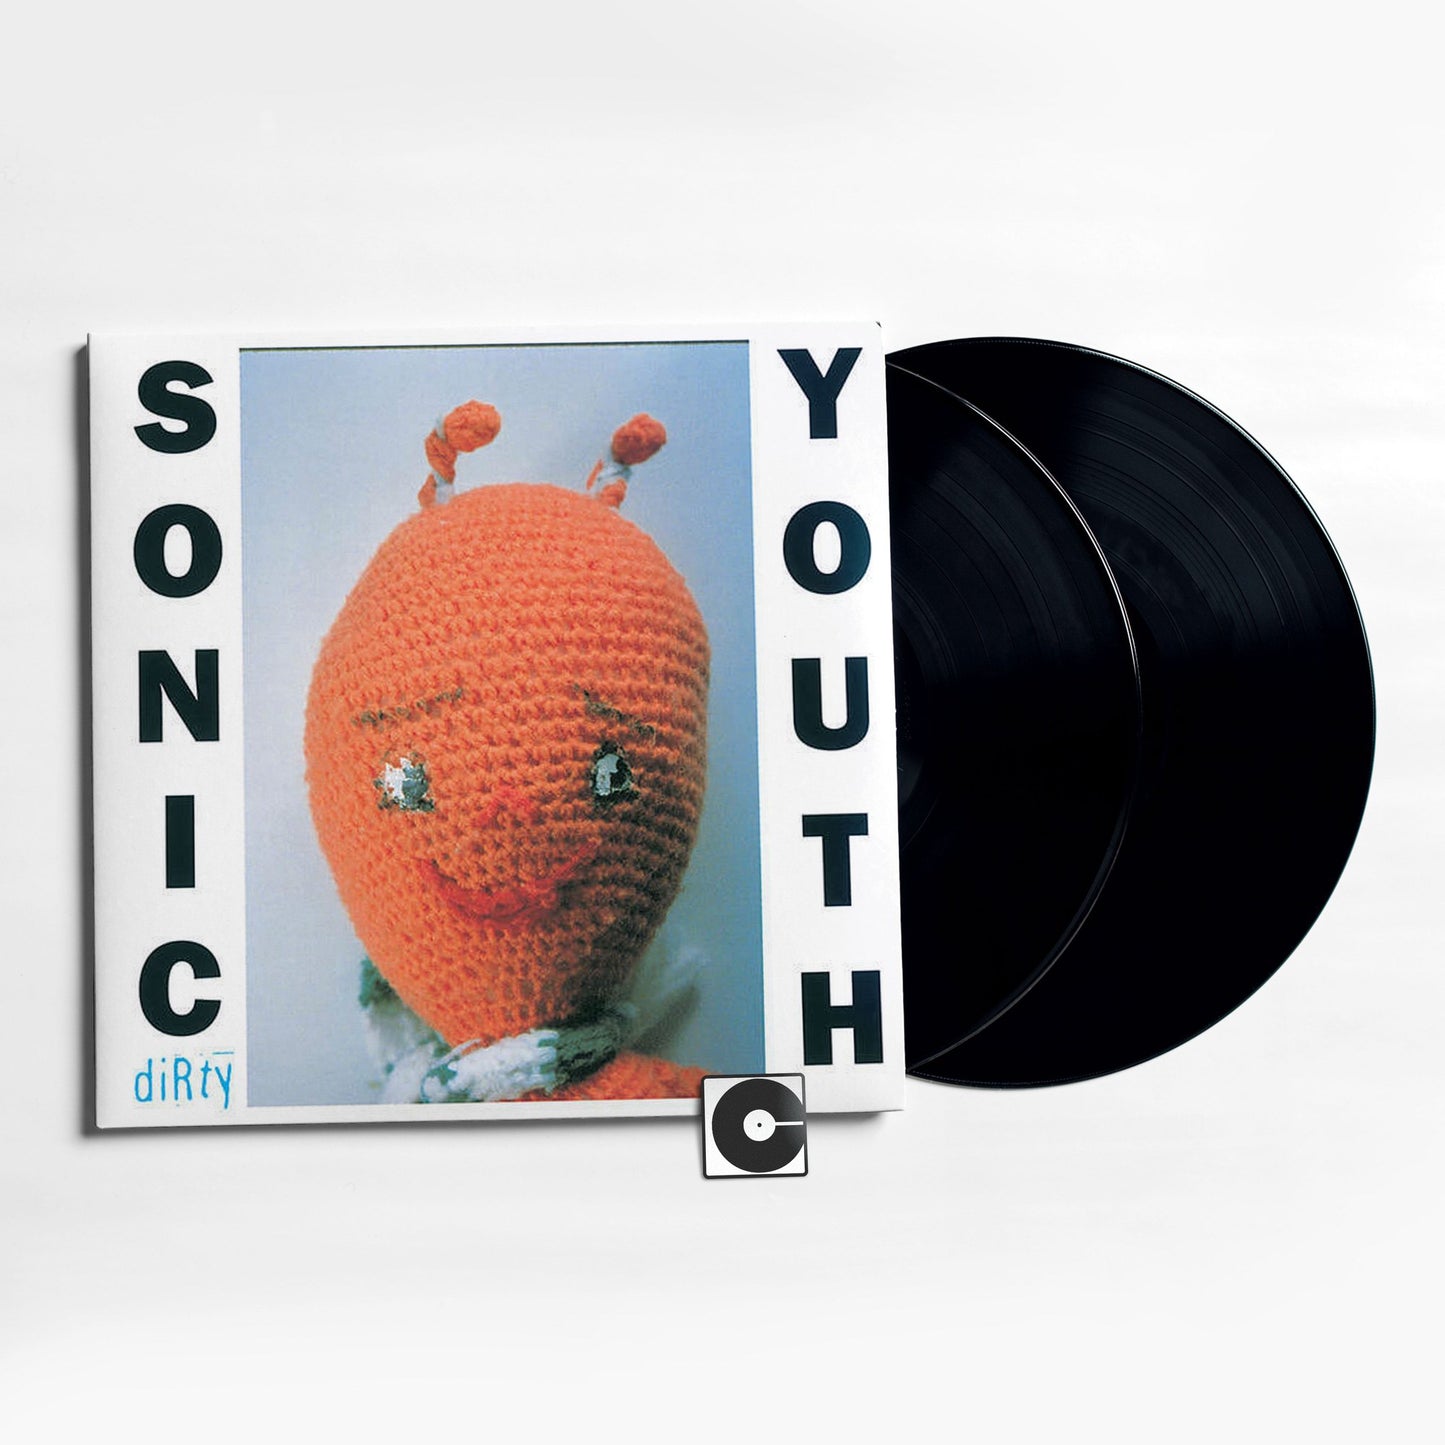 Sonic Youth - "Dirty"